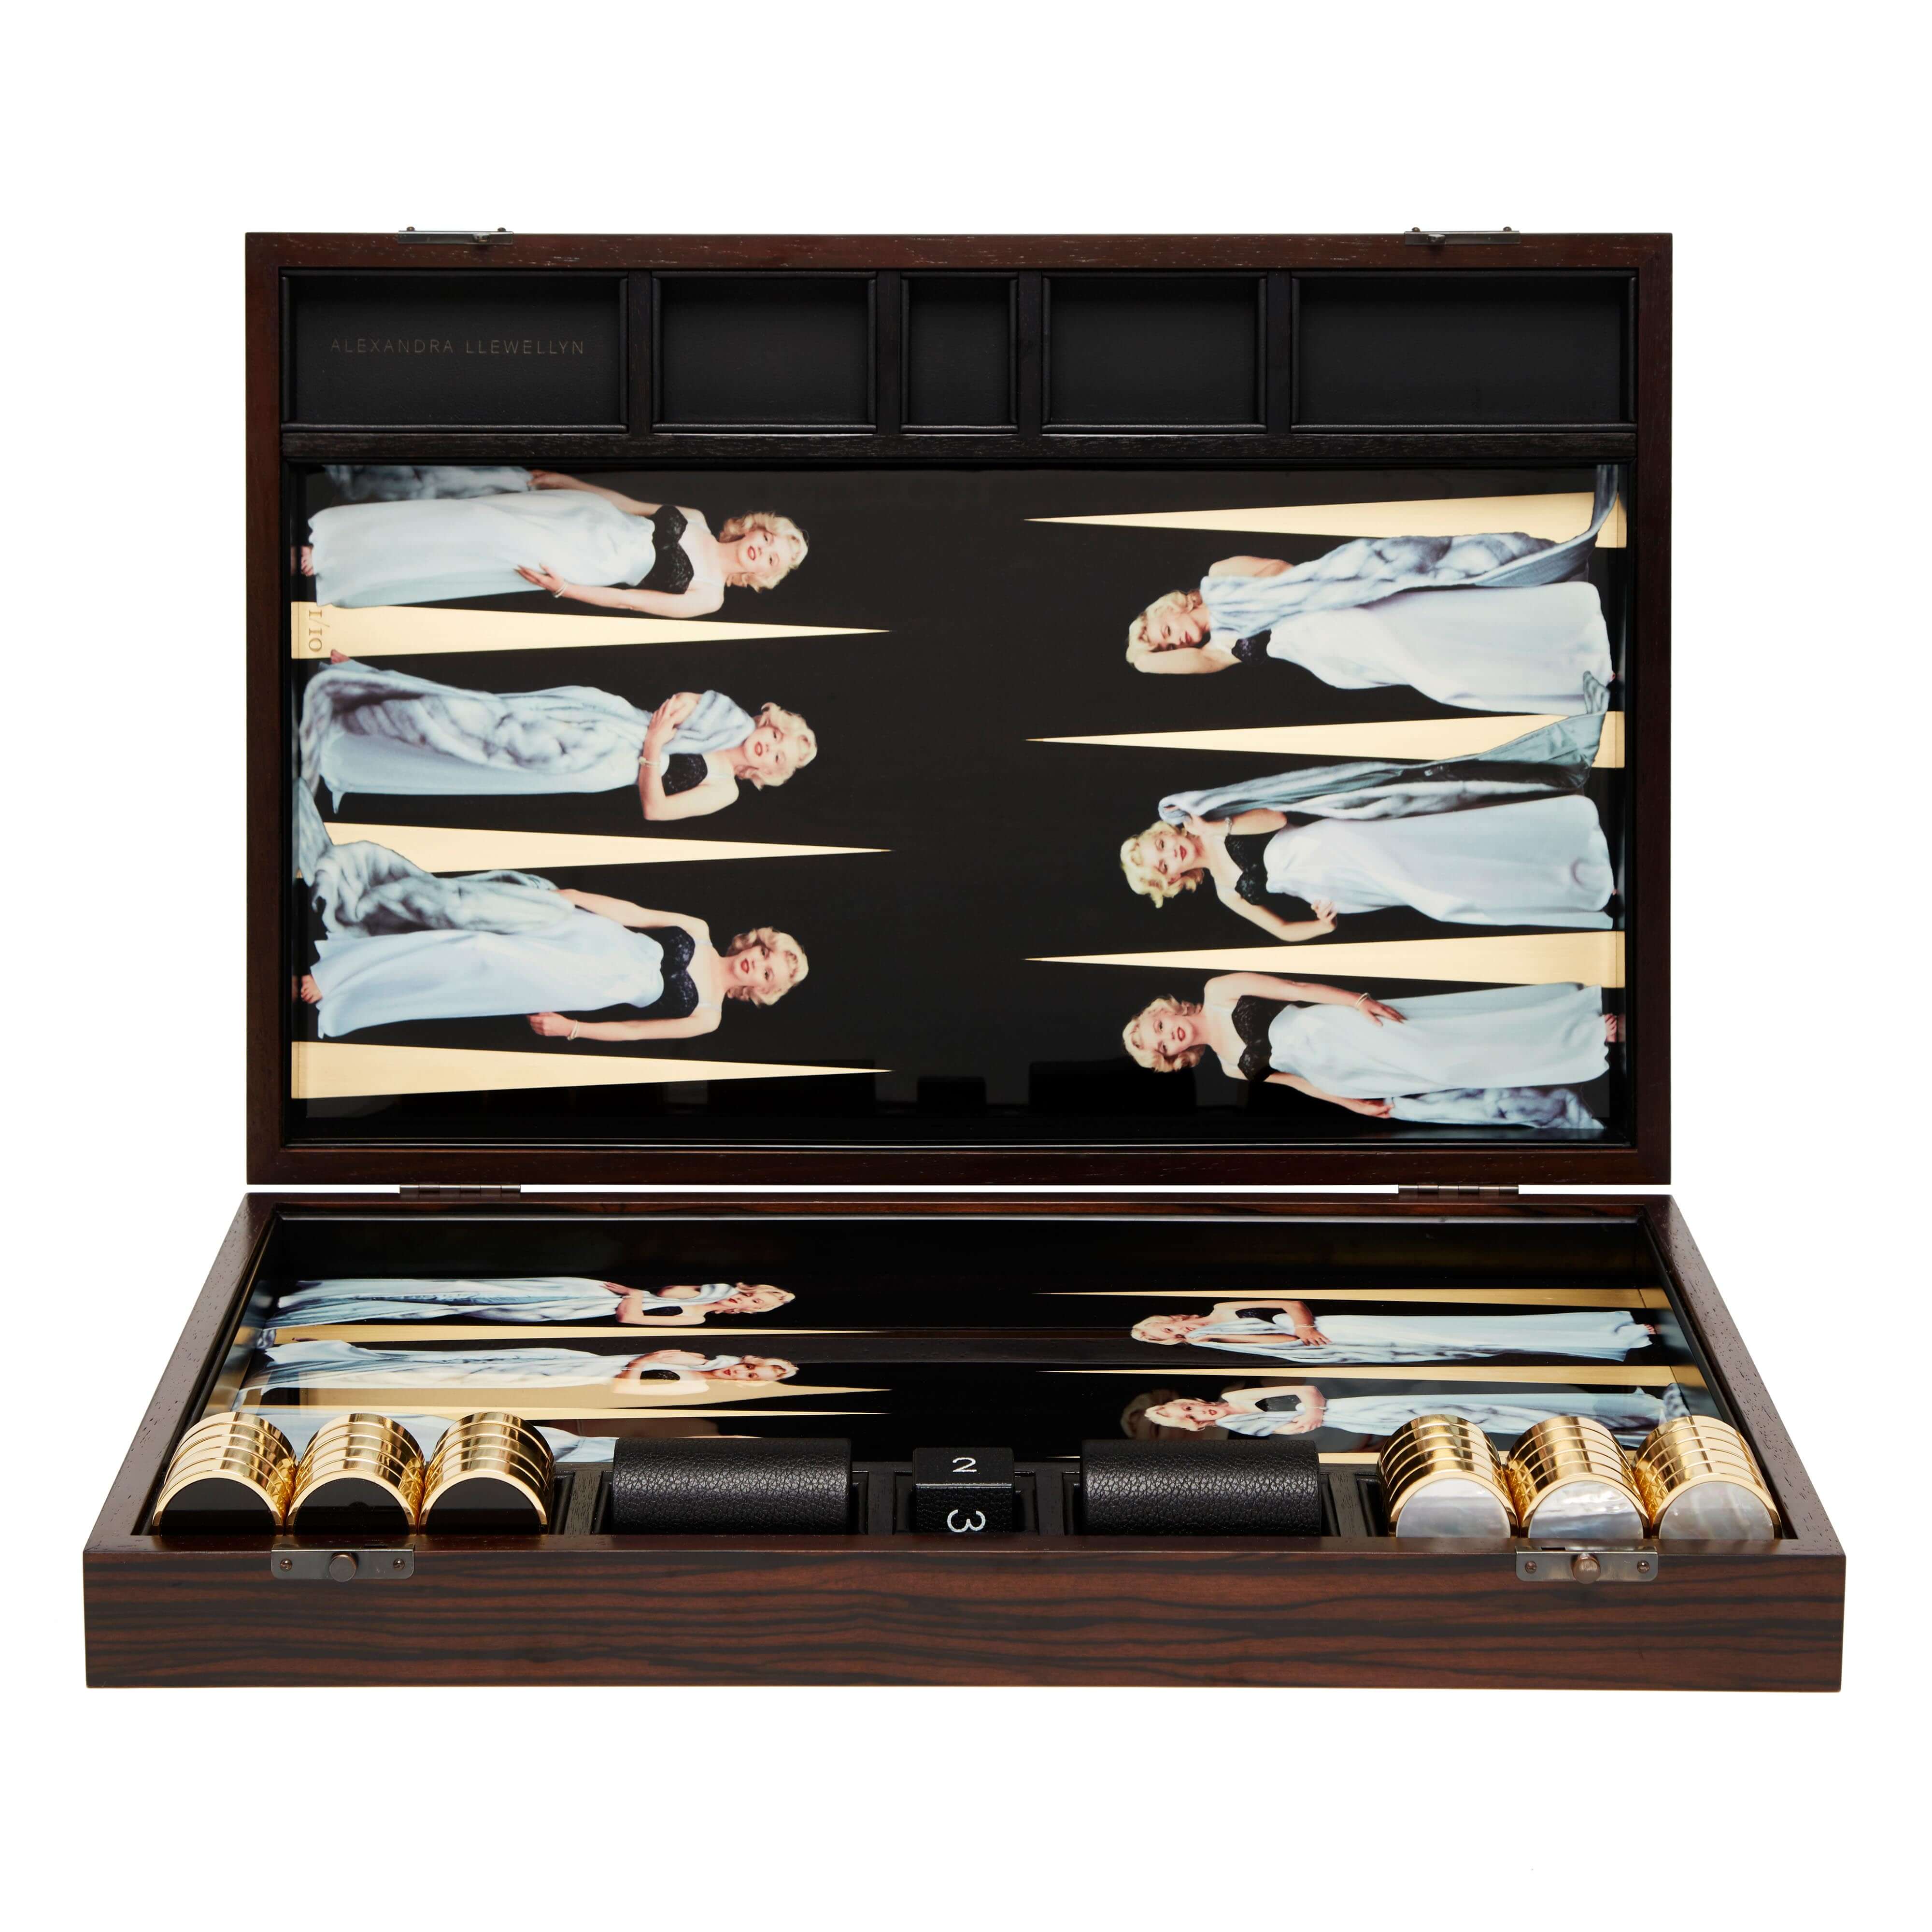 Marilyn Monroe backgammon backgammon board in an Ebony box with Black Marble and Mother of Pearl playing pieces